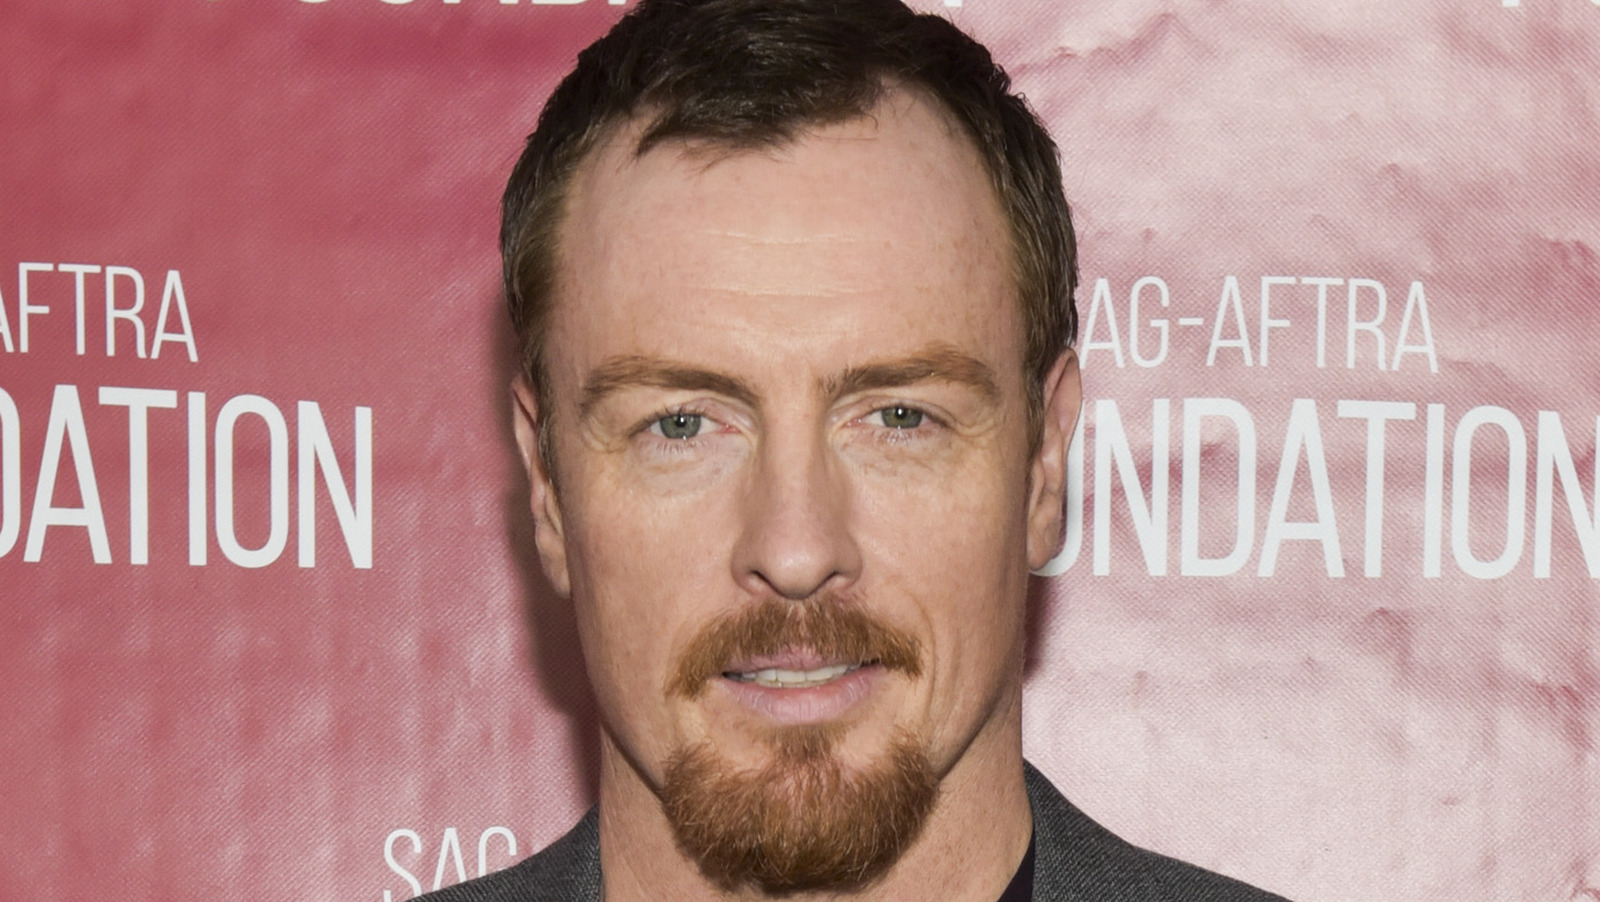 Toby Stephens, Biography, Movies & News